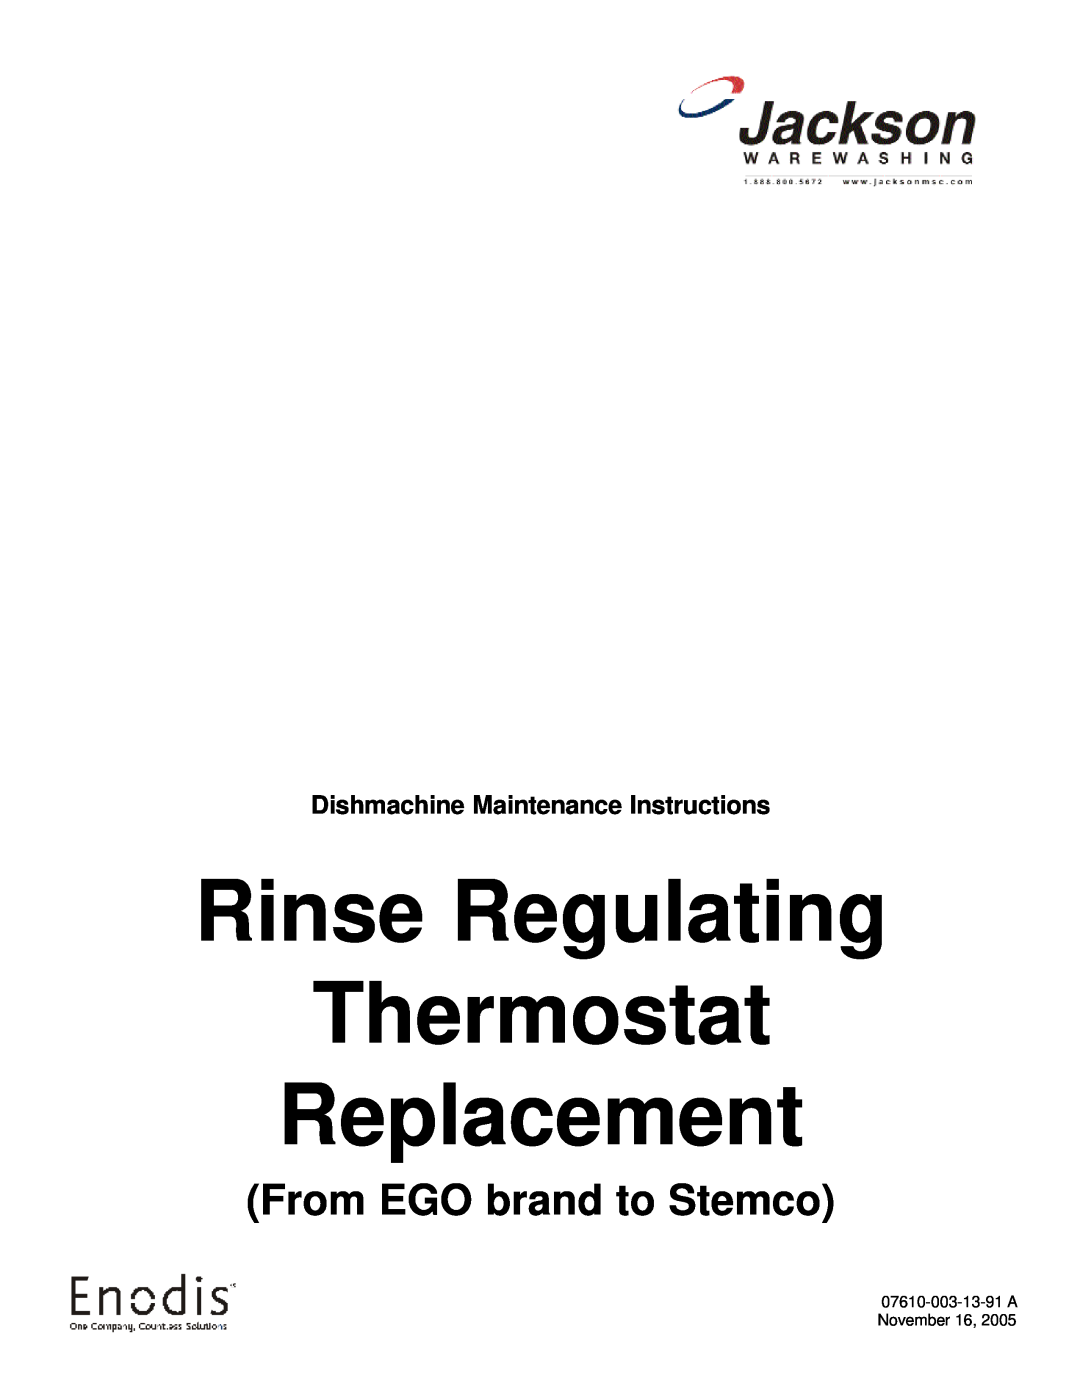 Jackson Rinse Regulating Thermostat Replacement manual From EGO brand to Stemco, Dishmachine Maintenance Instructions 